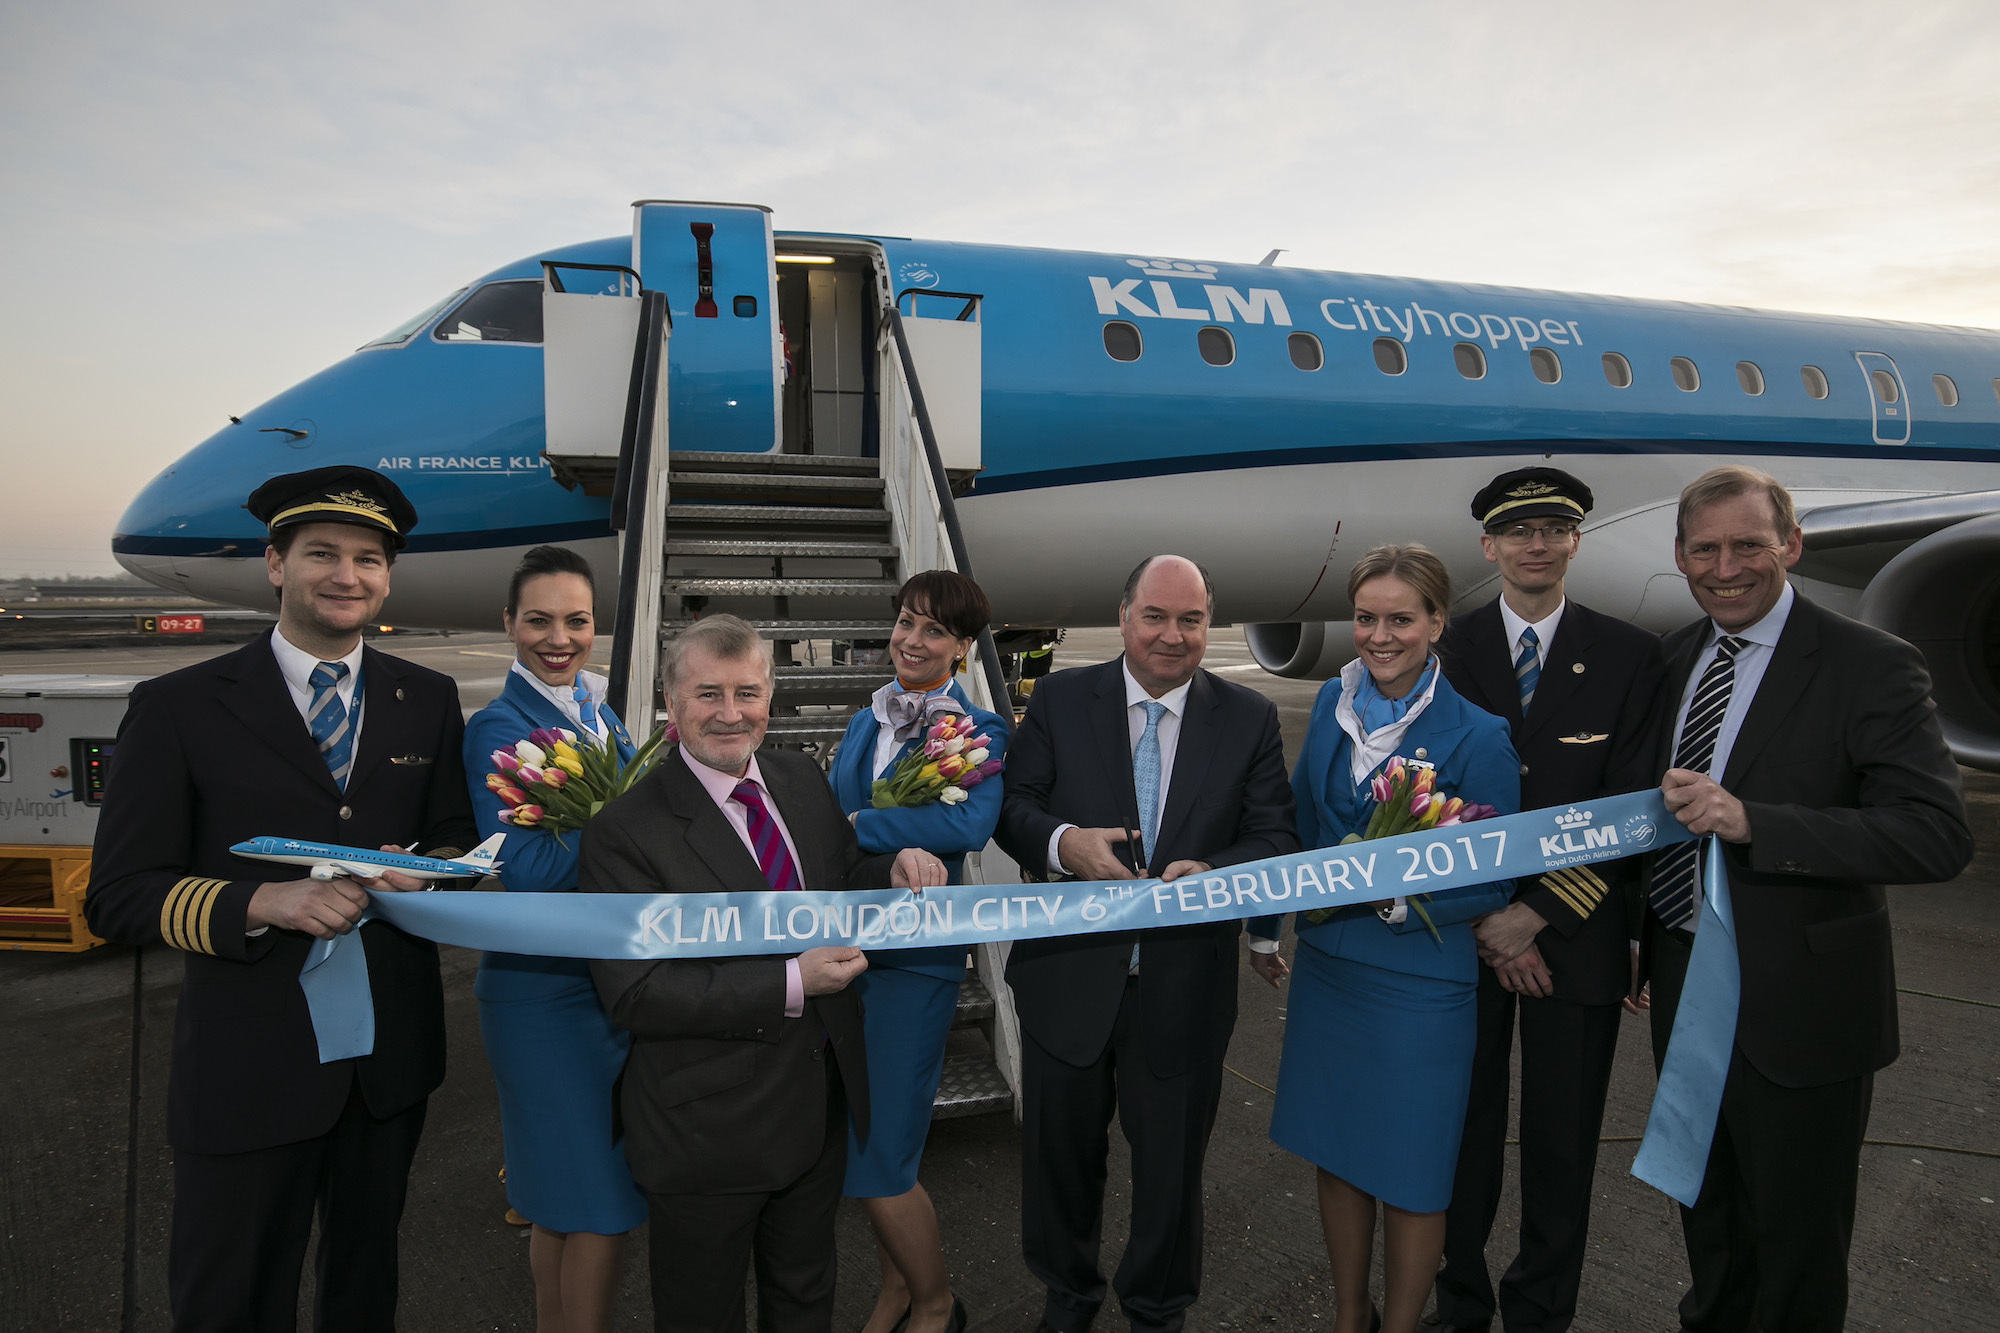 KLM Returns to London City Airport for the first time in almost 8 years